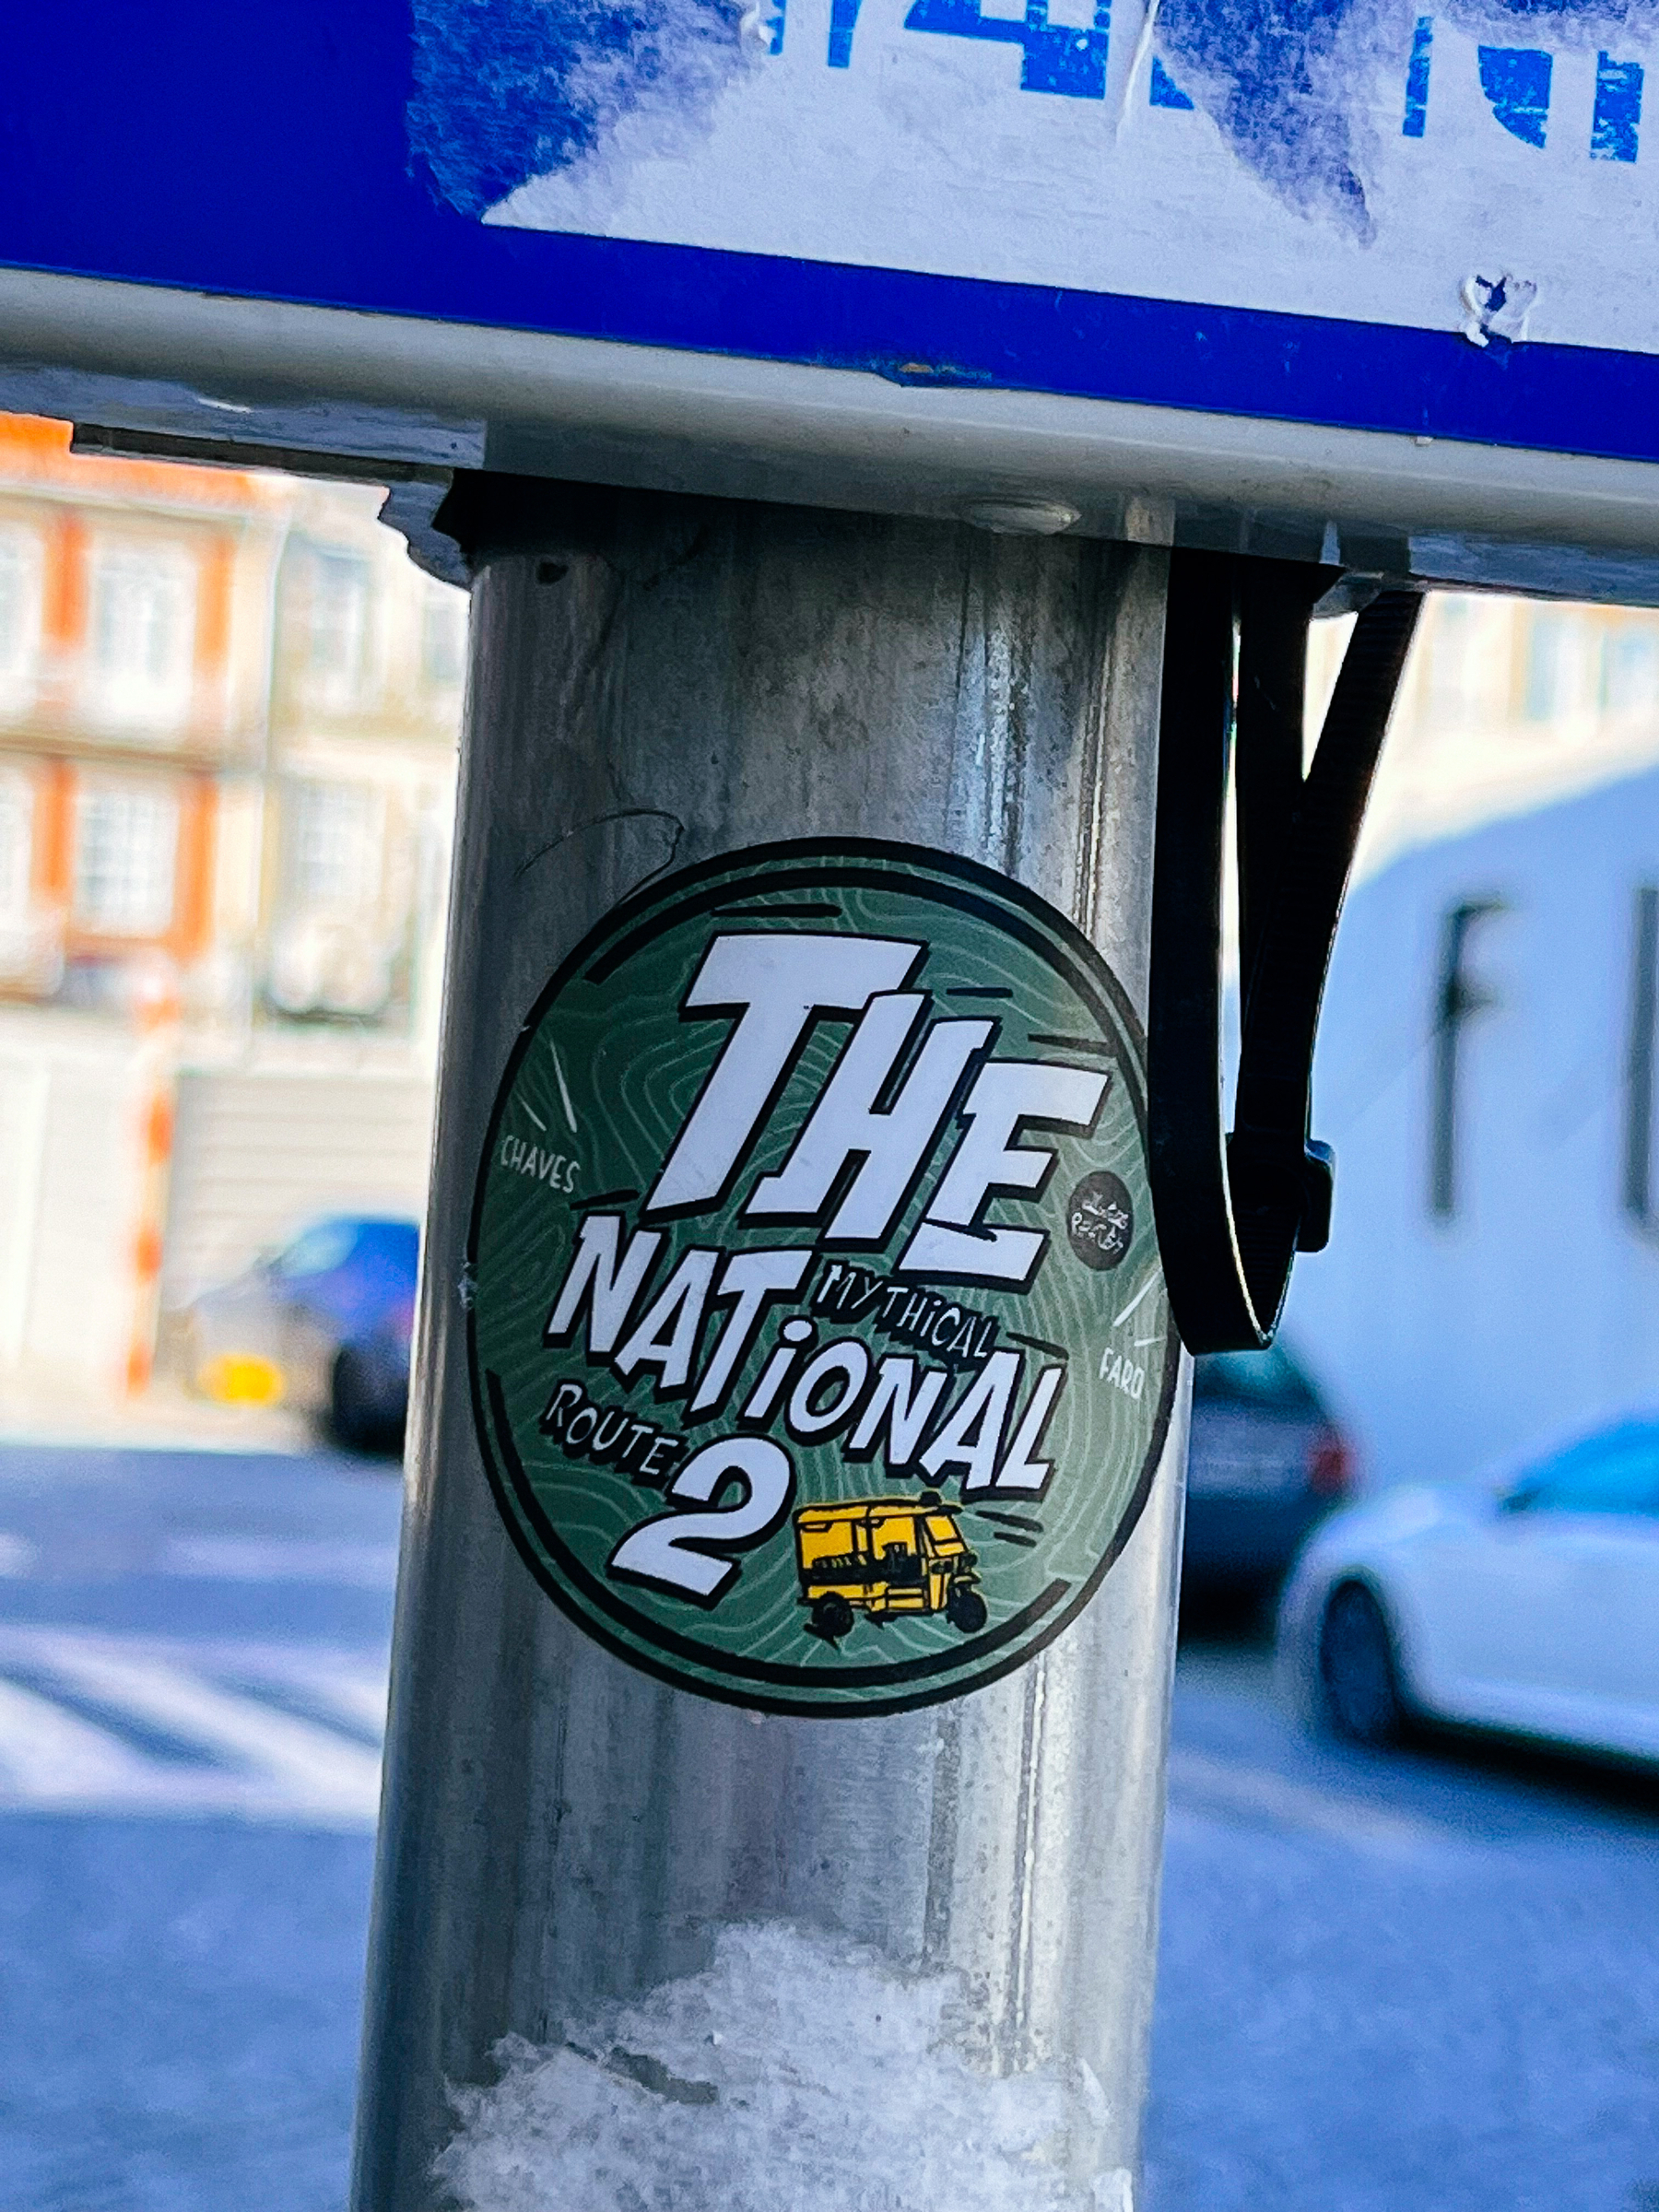 Sticker advertising the “mythical national 2” road. 